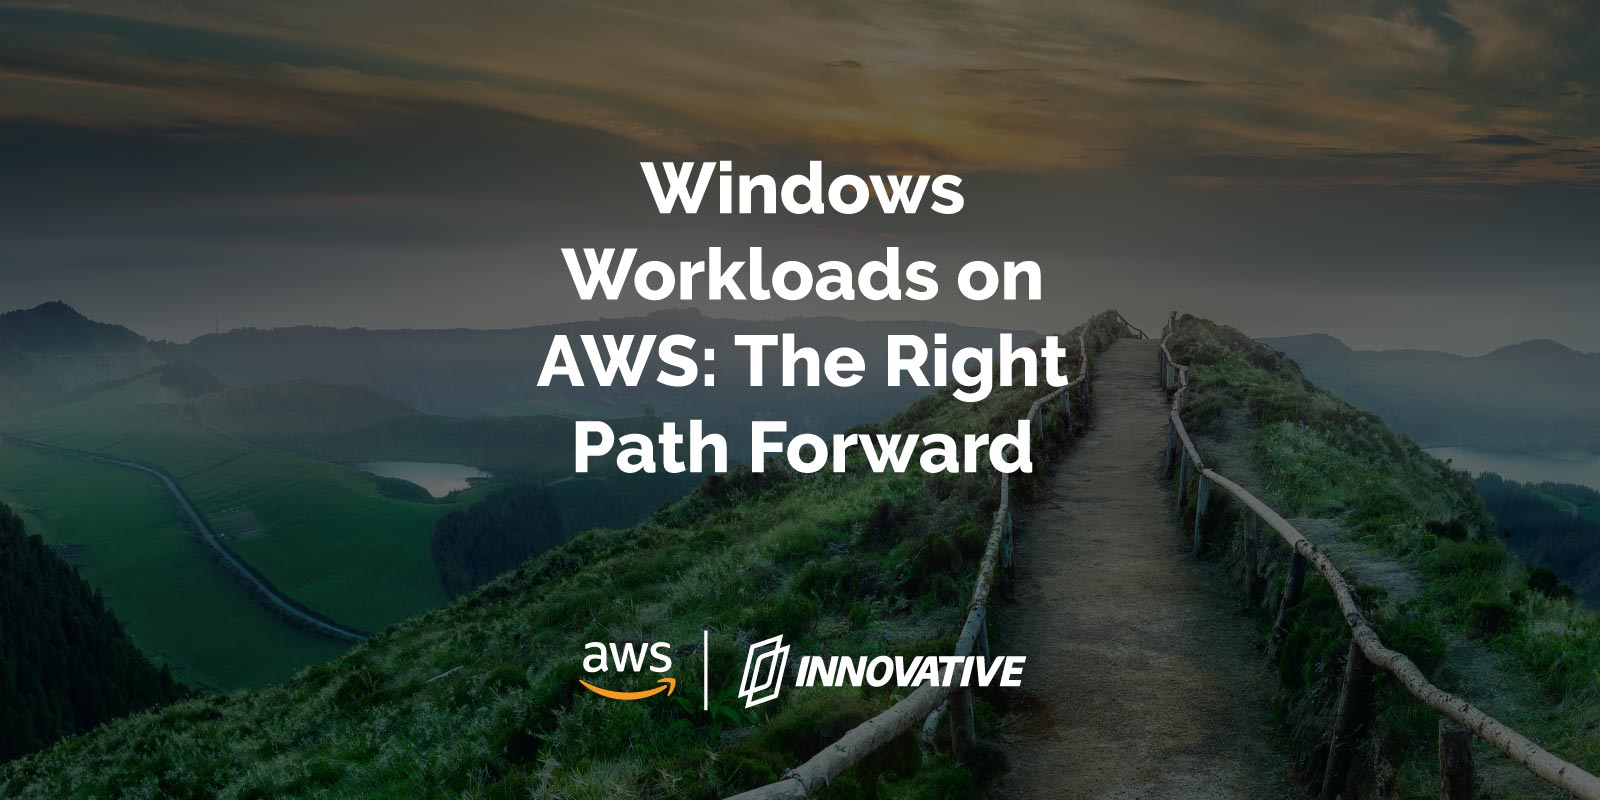 Windows Workloads on AWS: The Right Path Forward